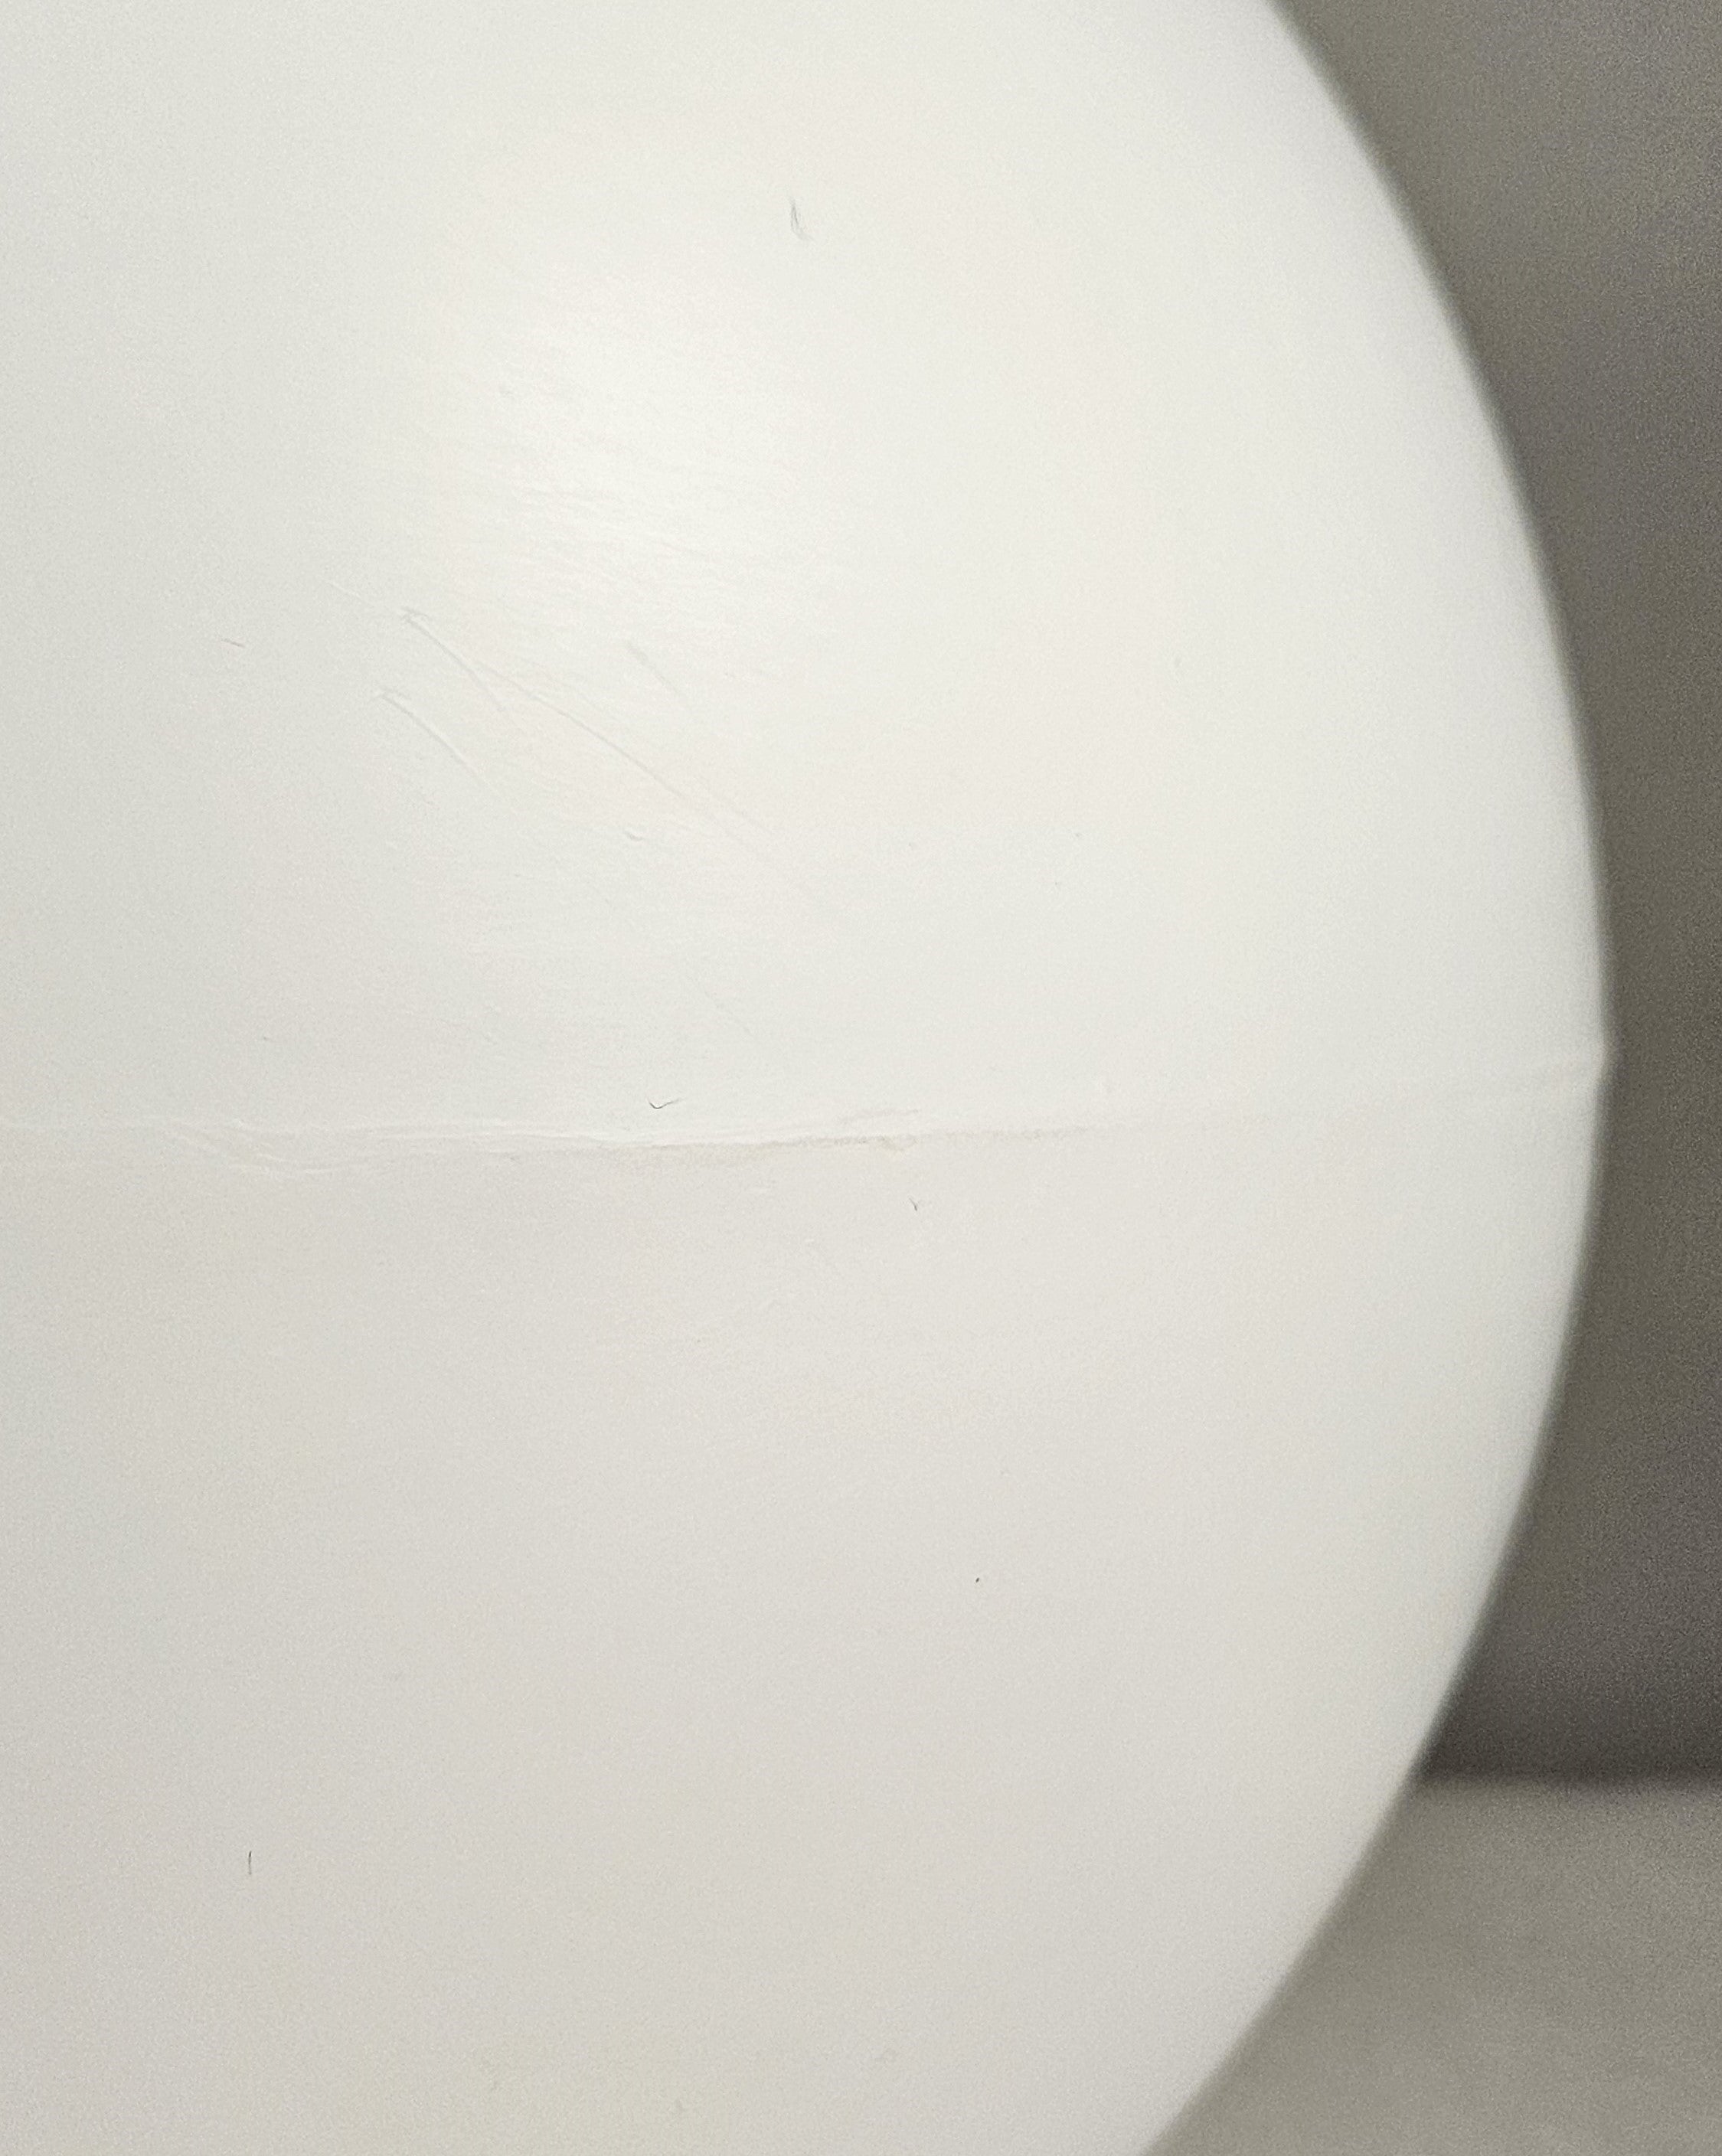 10" Neckless Plastic Globe with a 4" Hole (see more description & pictures)